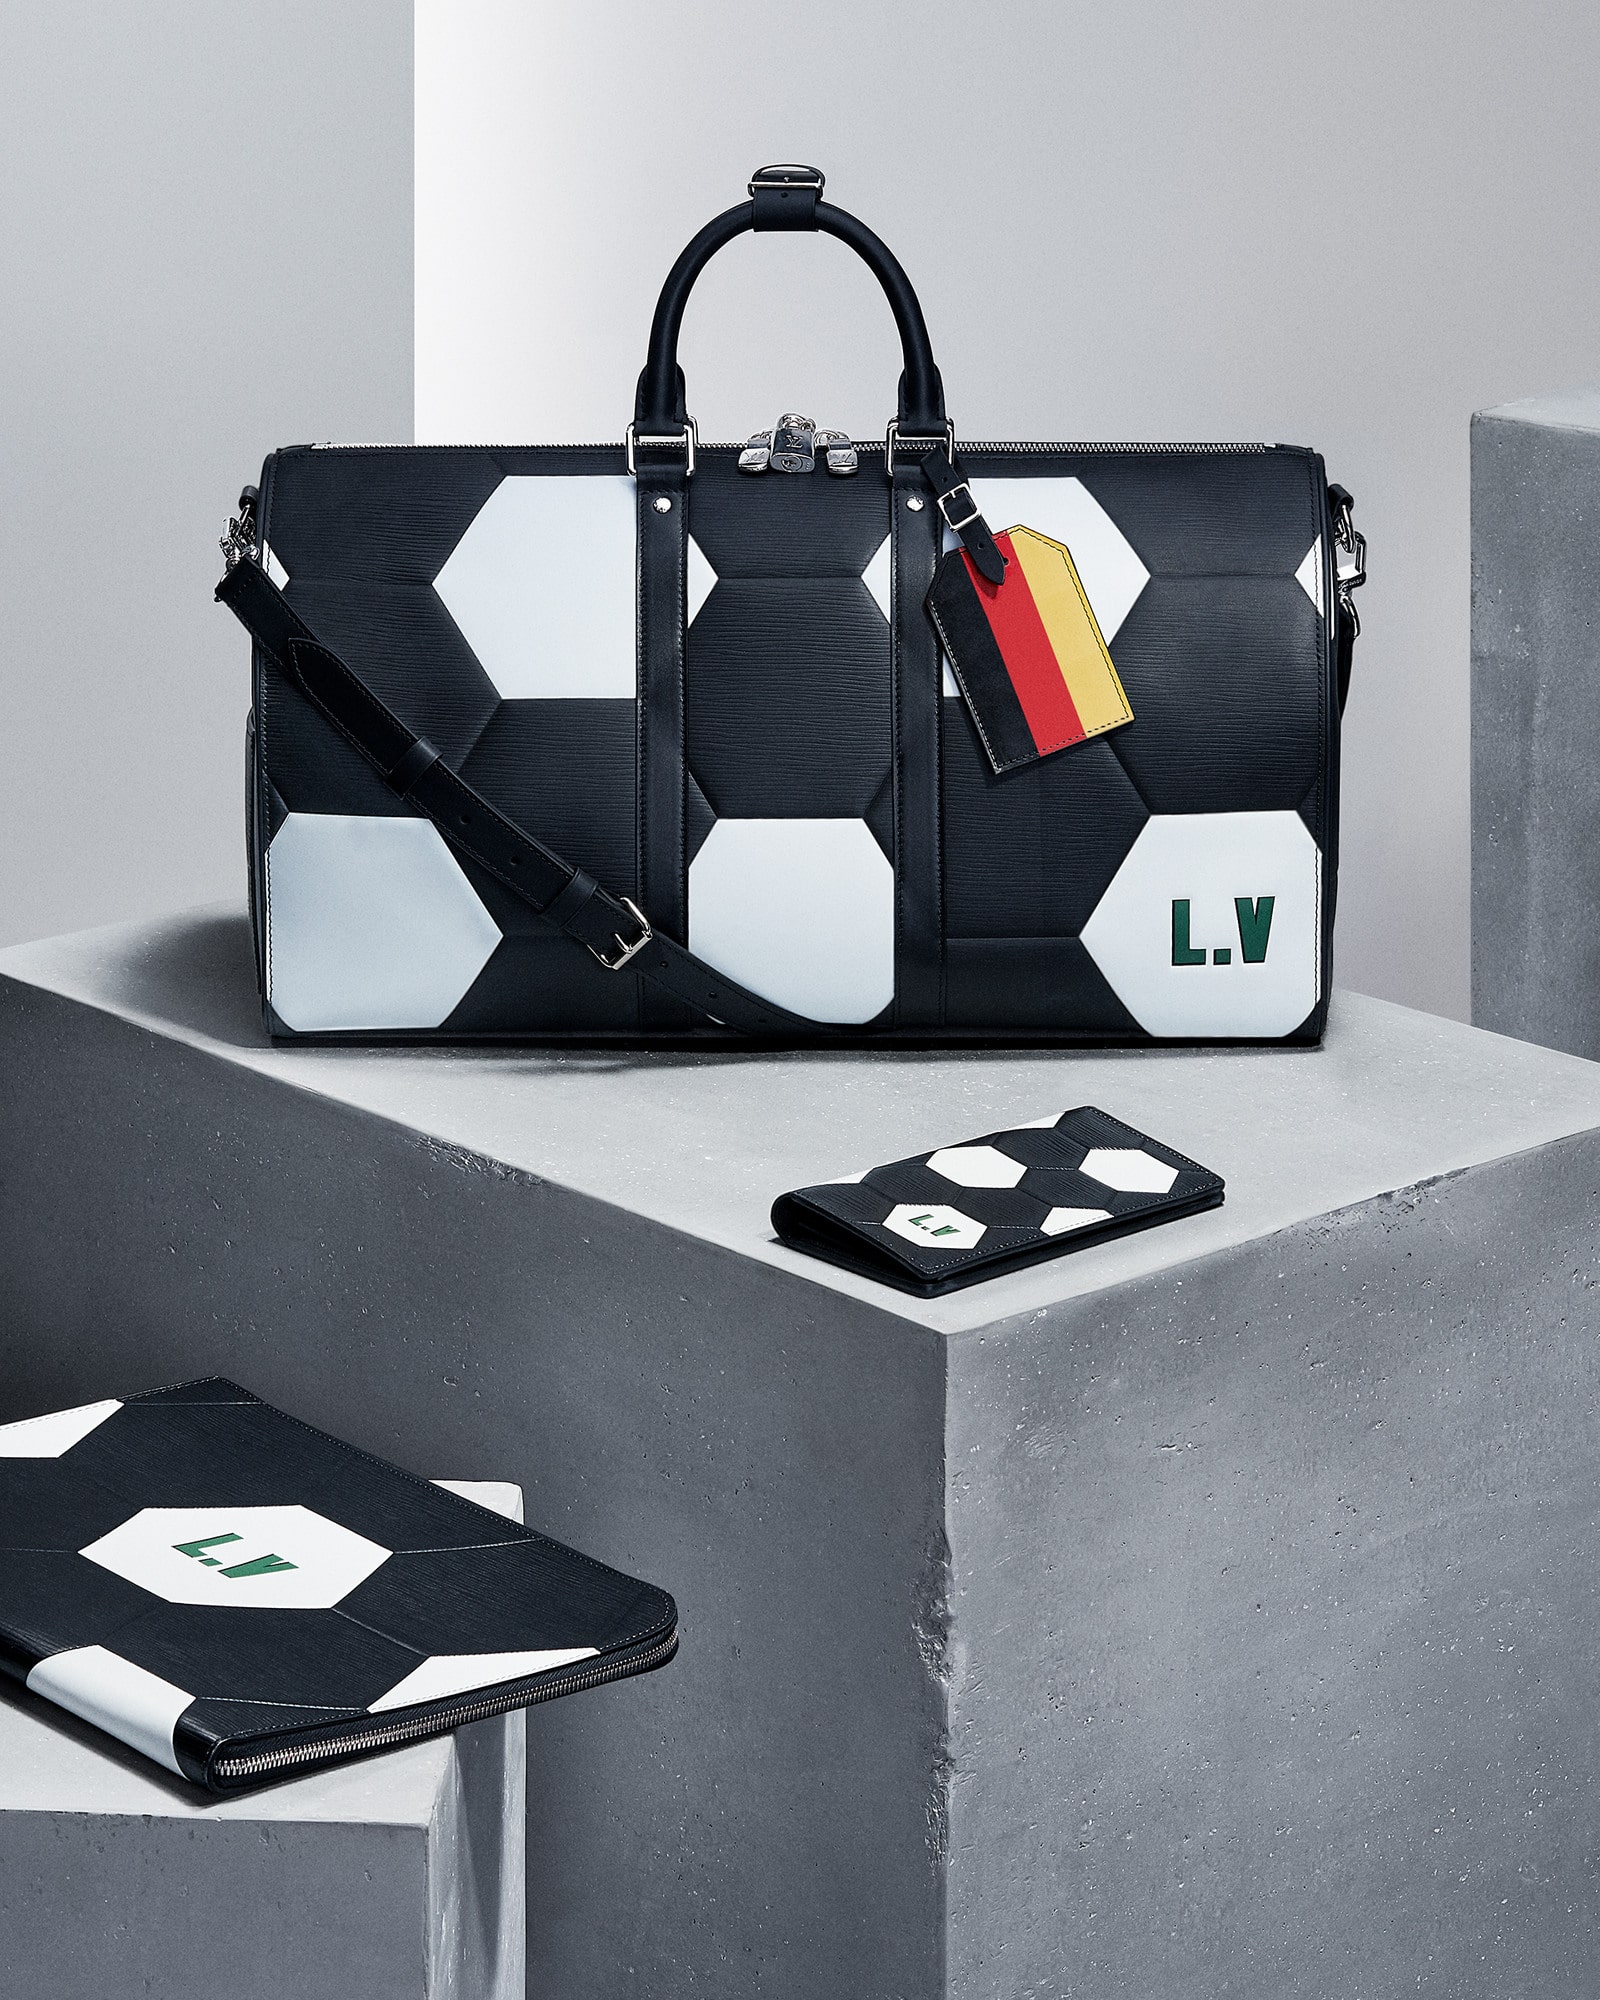 FRESH LOOK: LOUIS VUITTON REDESIGNS BAGS FOR FIFA WORLD CUP